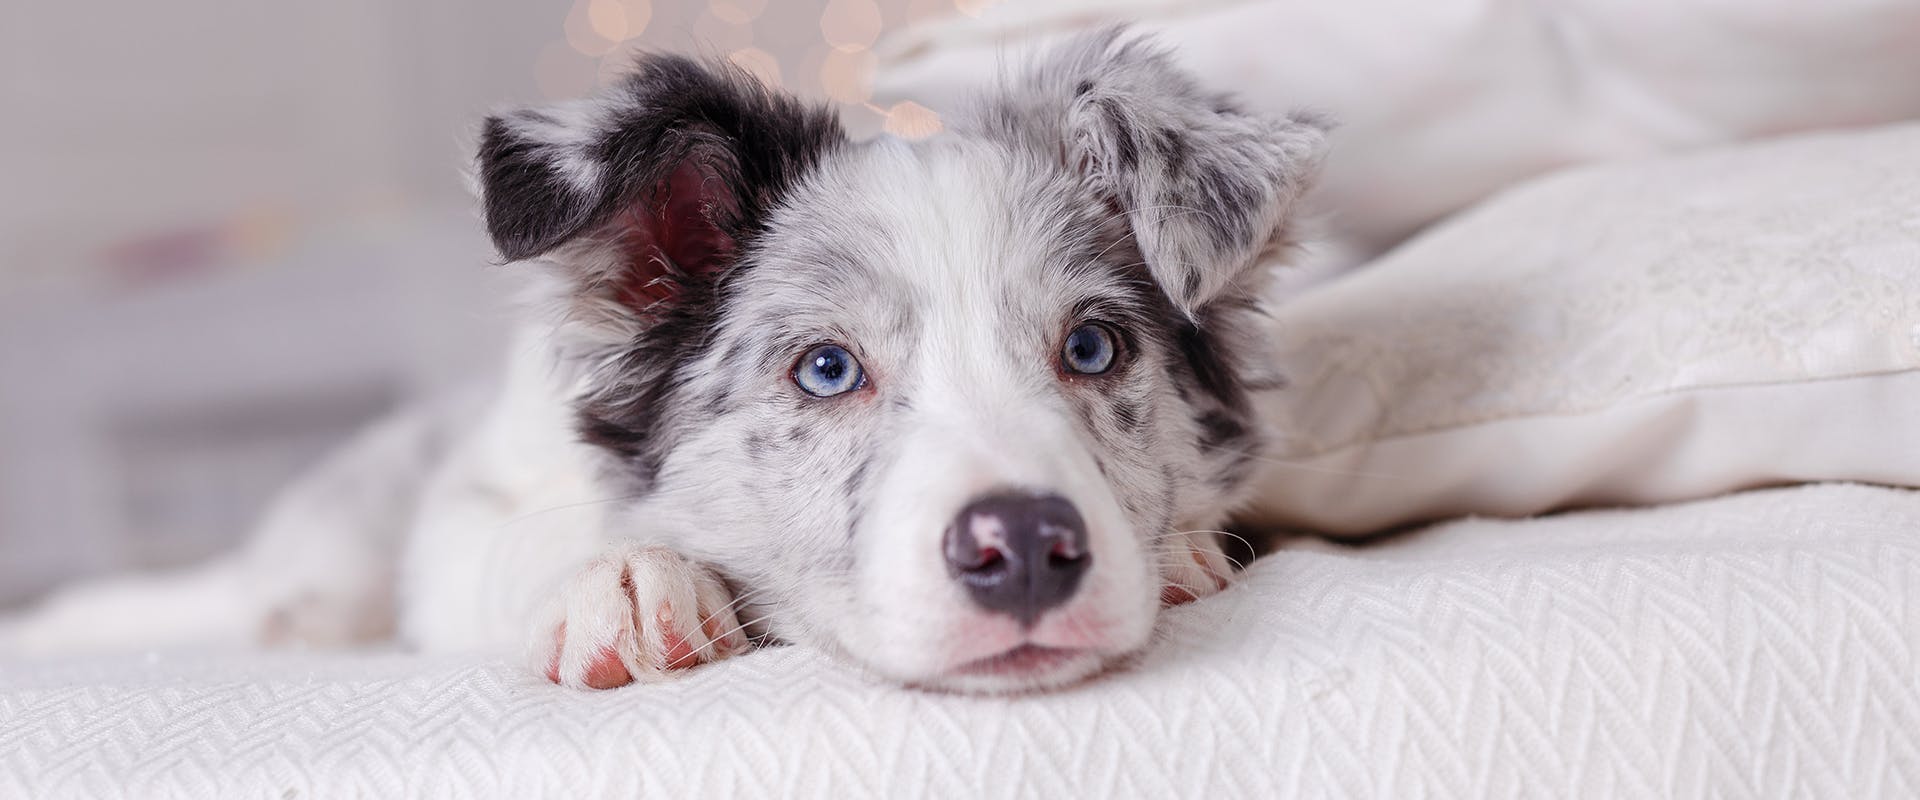 A cute Australian Shepherd dog laying on a white bed